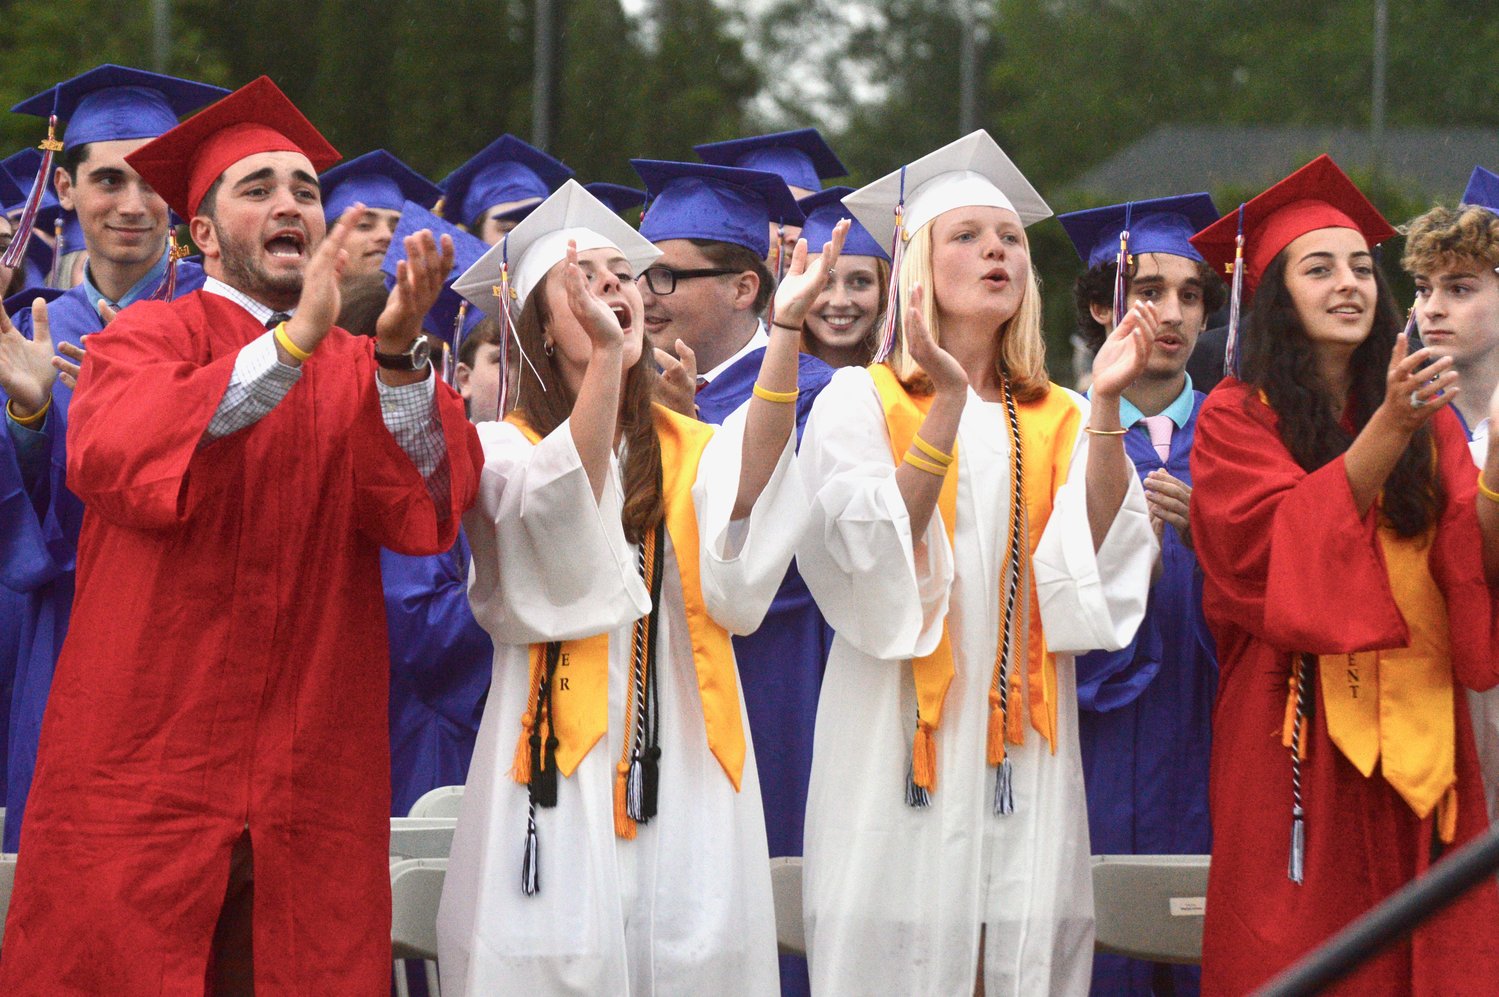 Michael Nardolillo, Megan Buddemeyer, Ellen Stack and Meghan Lehane (from left) cheer on fellow graduates as they were receiving their diplomas at Friday night’s commencement ceremony on the Portsmouth High School baseball field.